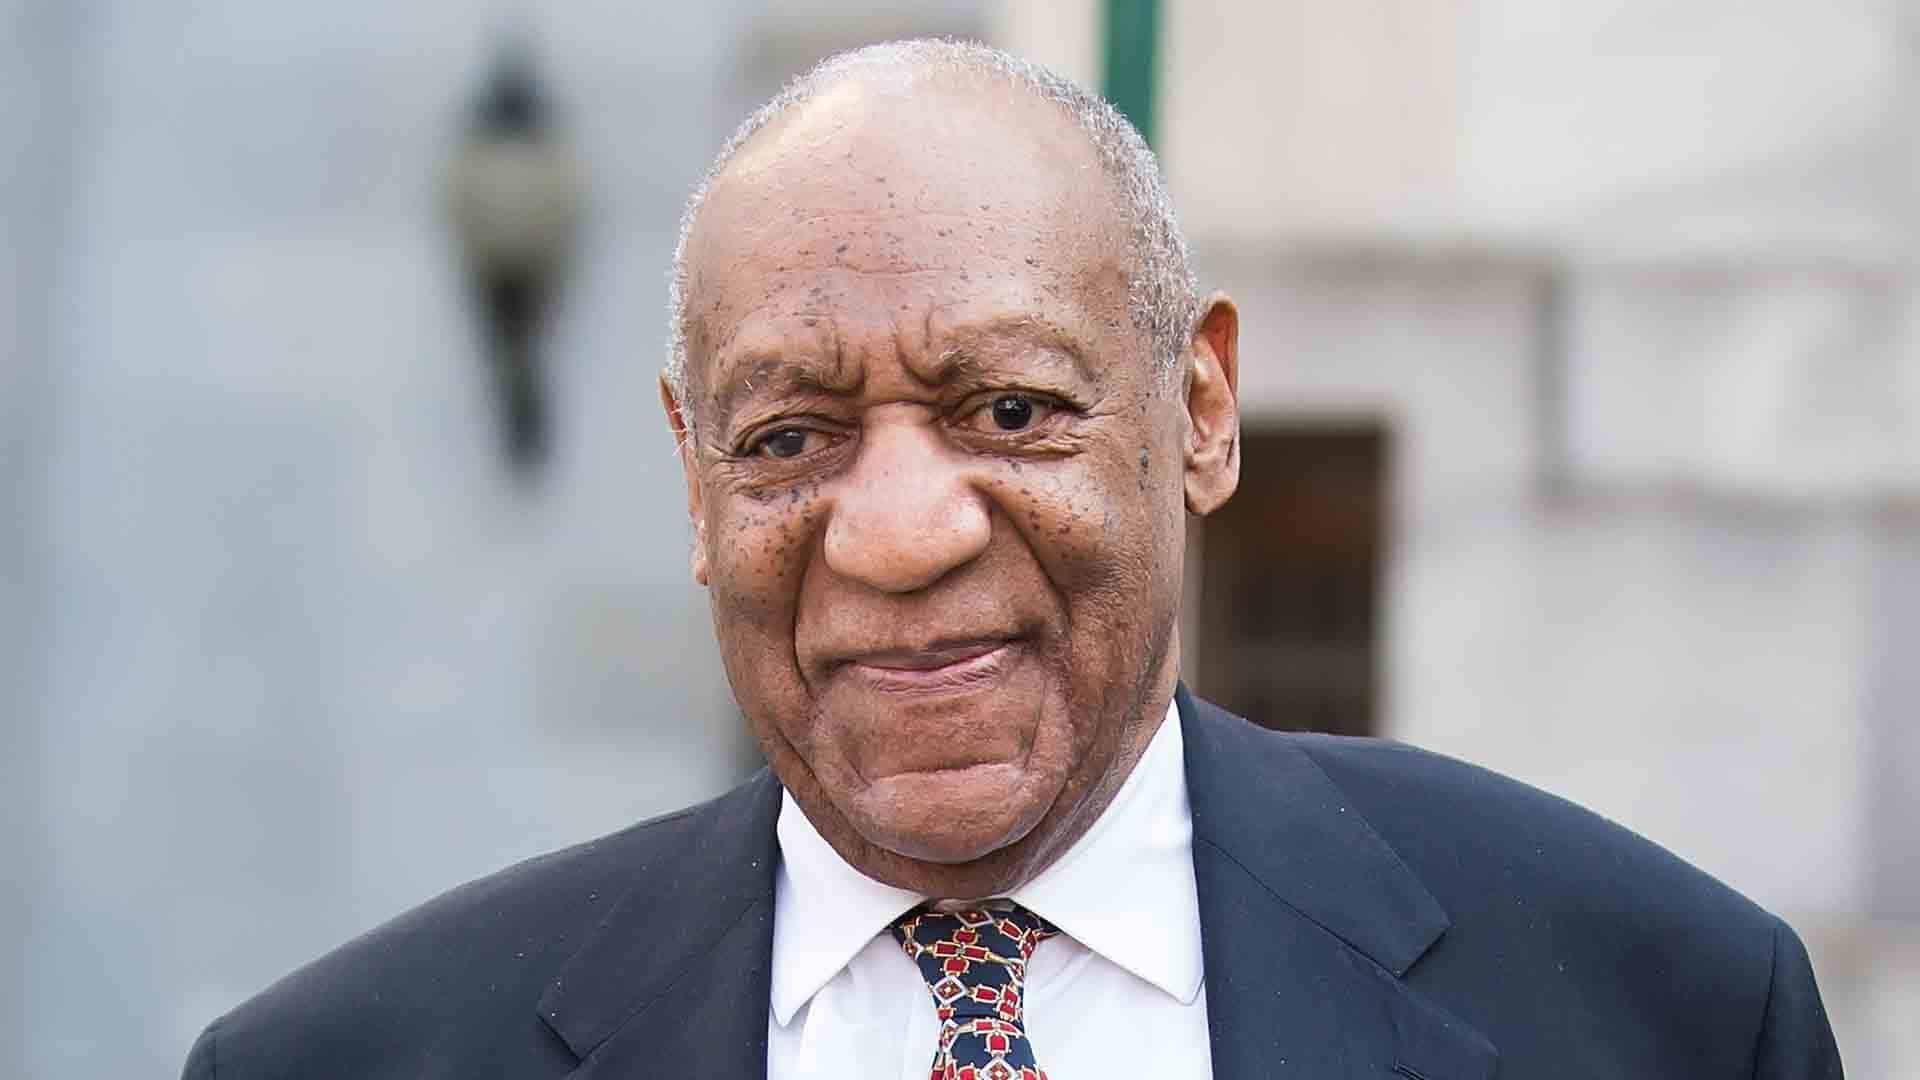 Bill Cosby Biography in Detail